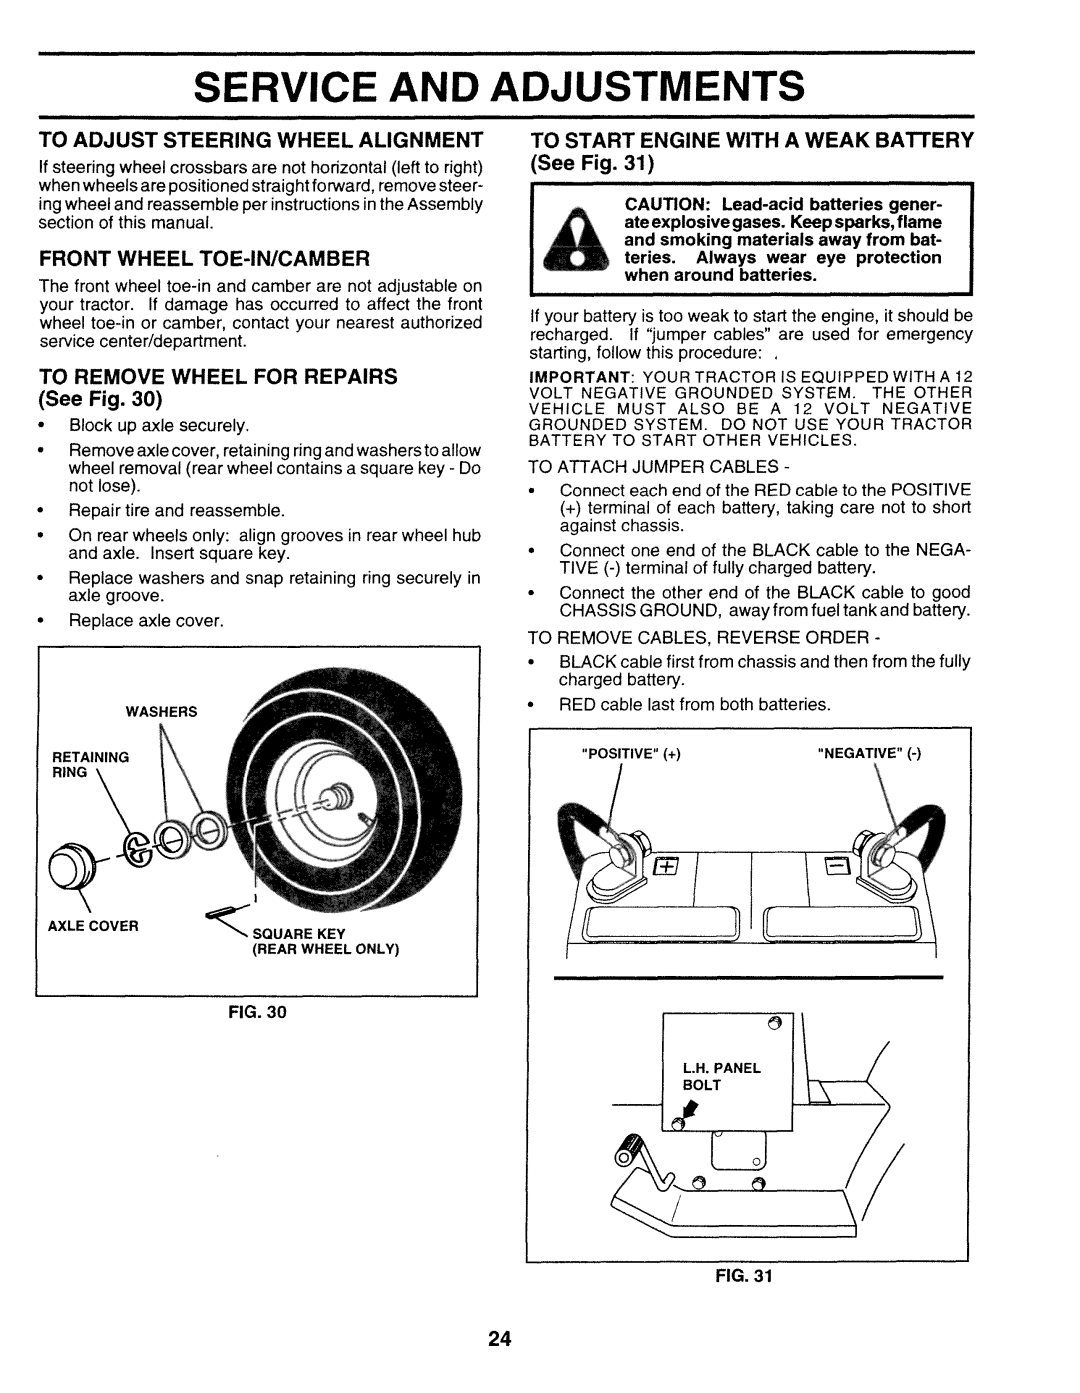 Sears 917.25271 Service And Adjustments, To Adjust Steering Wheel Alignment, Front Wheel Toe-In/Camber, See Fig 